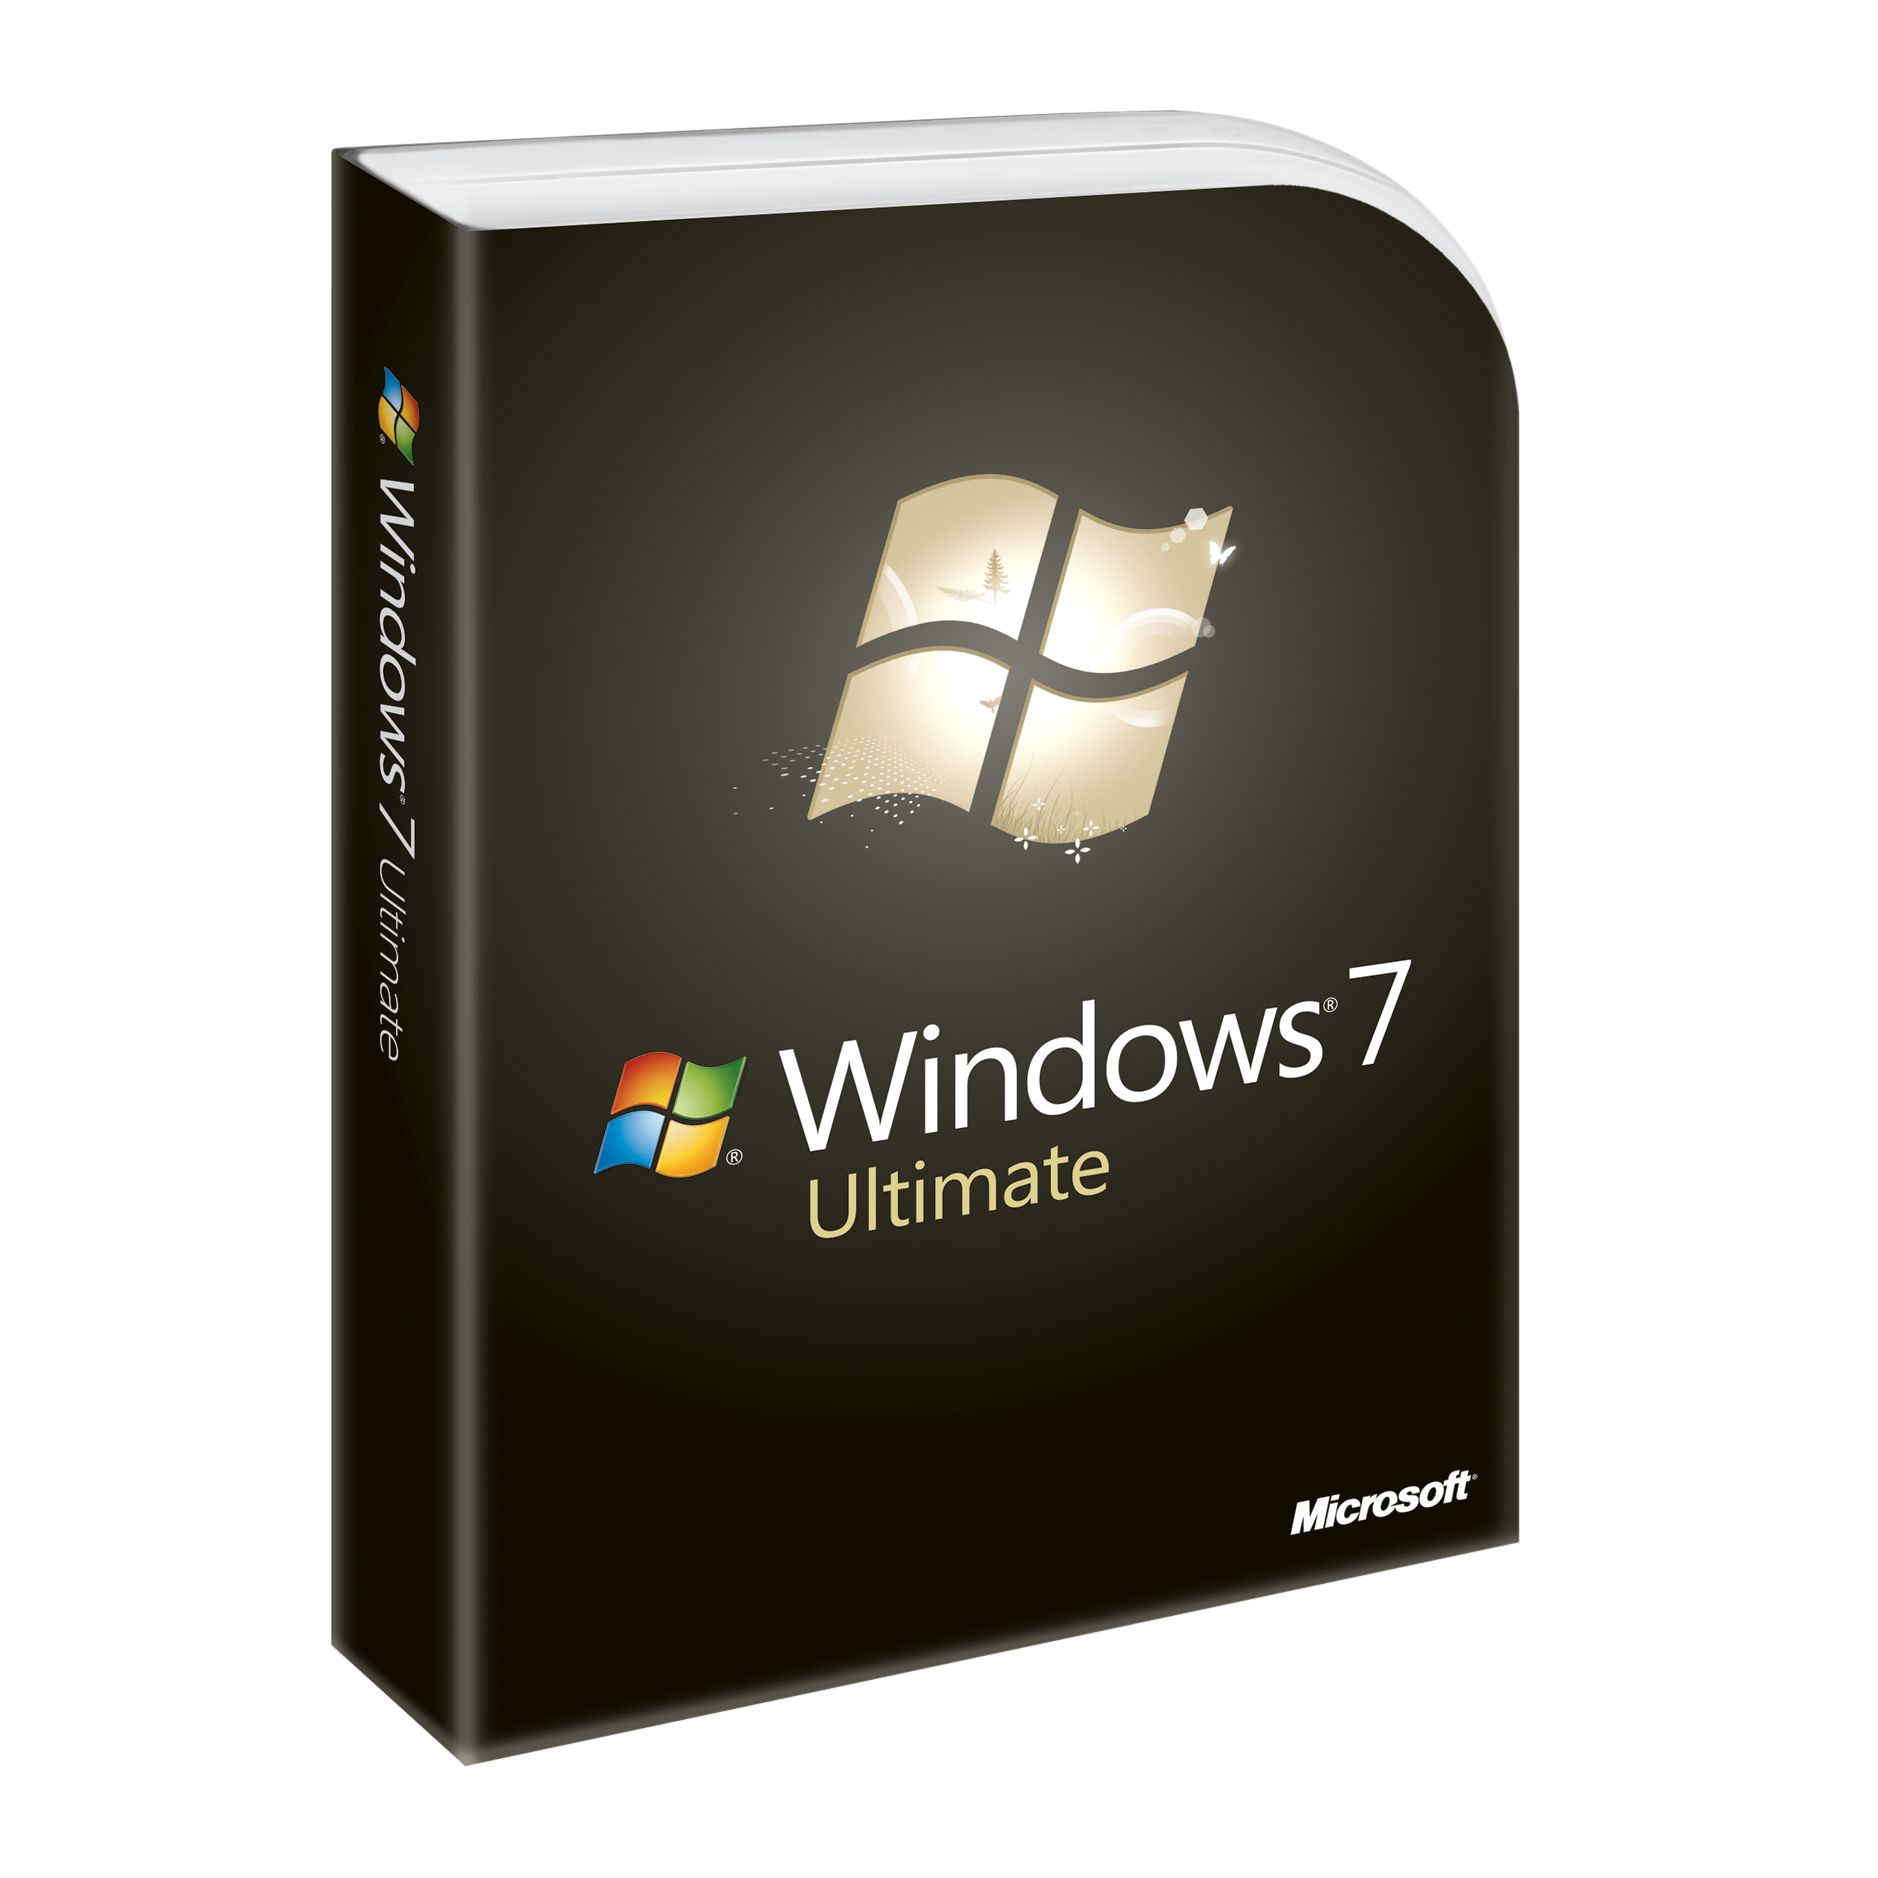 Windows 7 Ultimate for PC at John Lewis